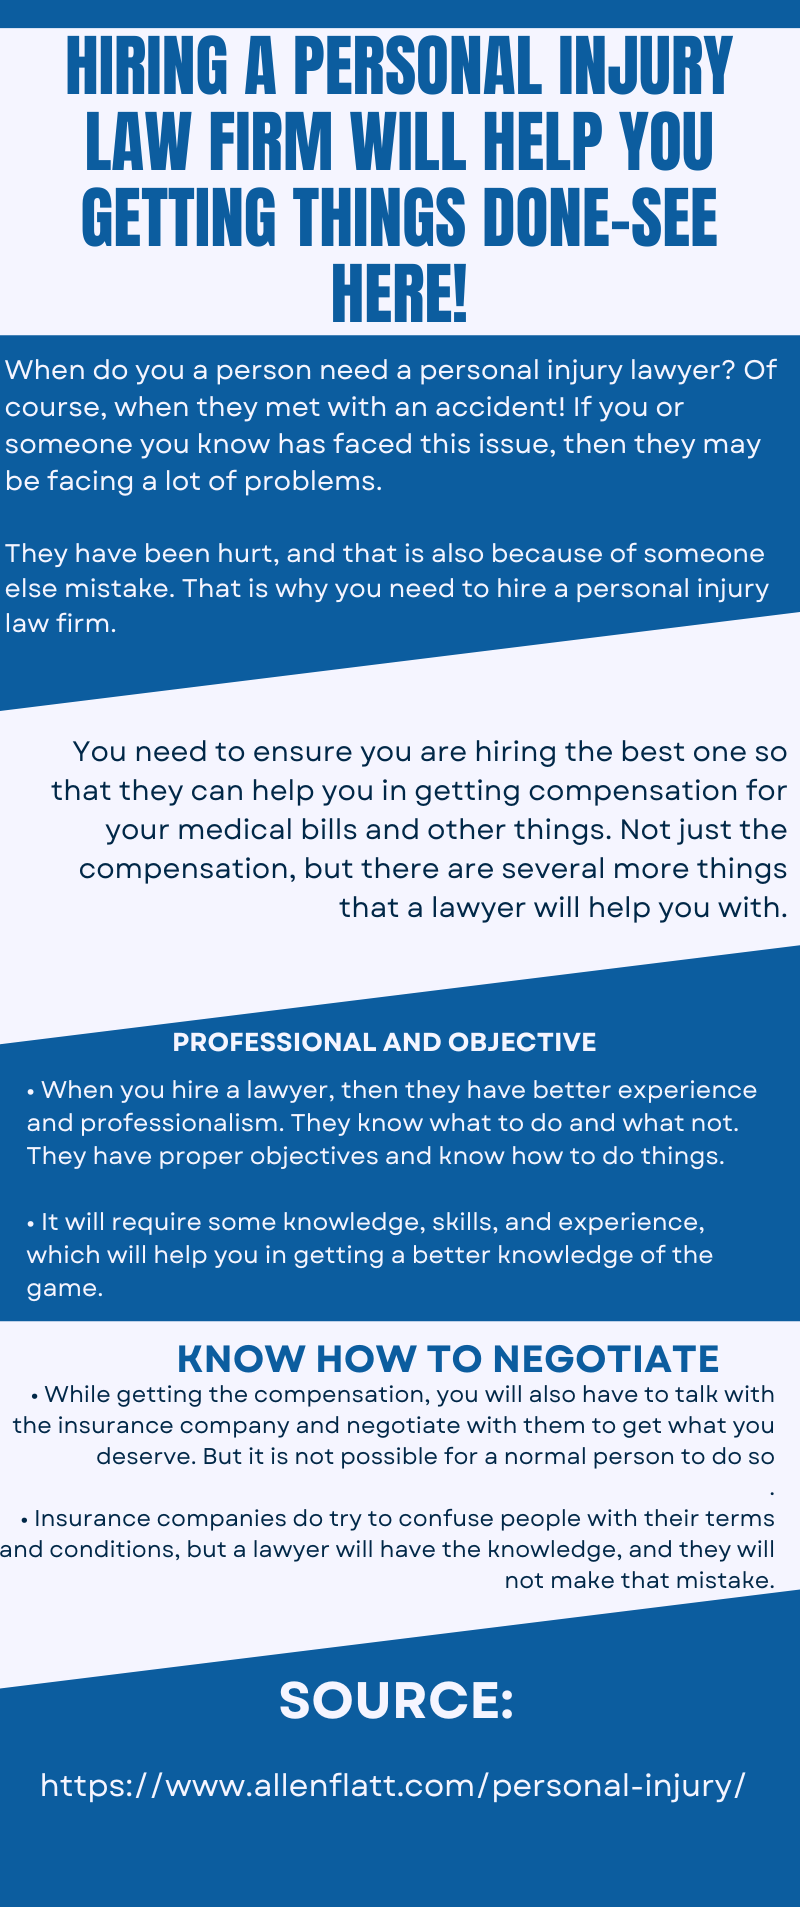 Personal Injury Law Firm-Help you in getting compensation